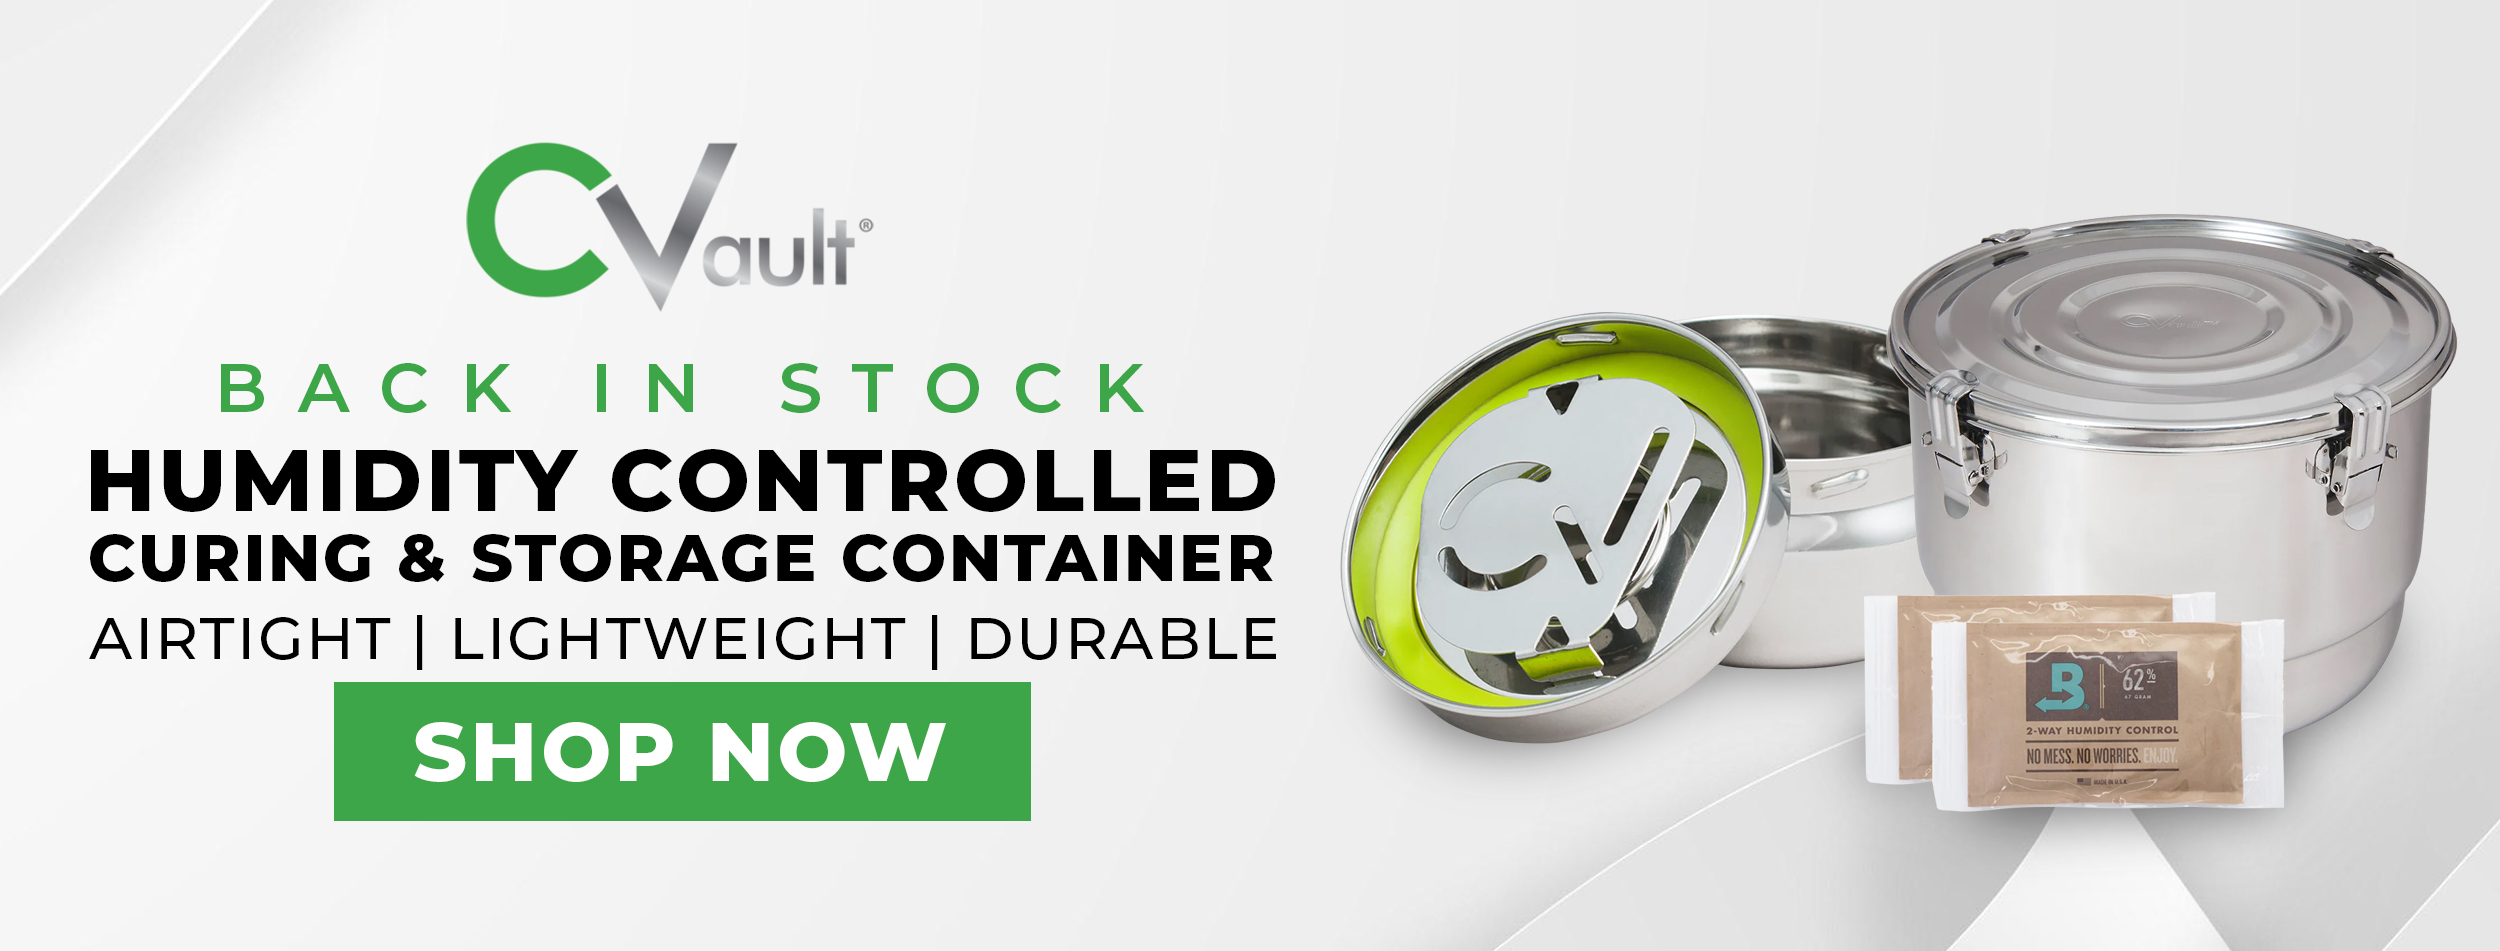 CVault Back In Stock